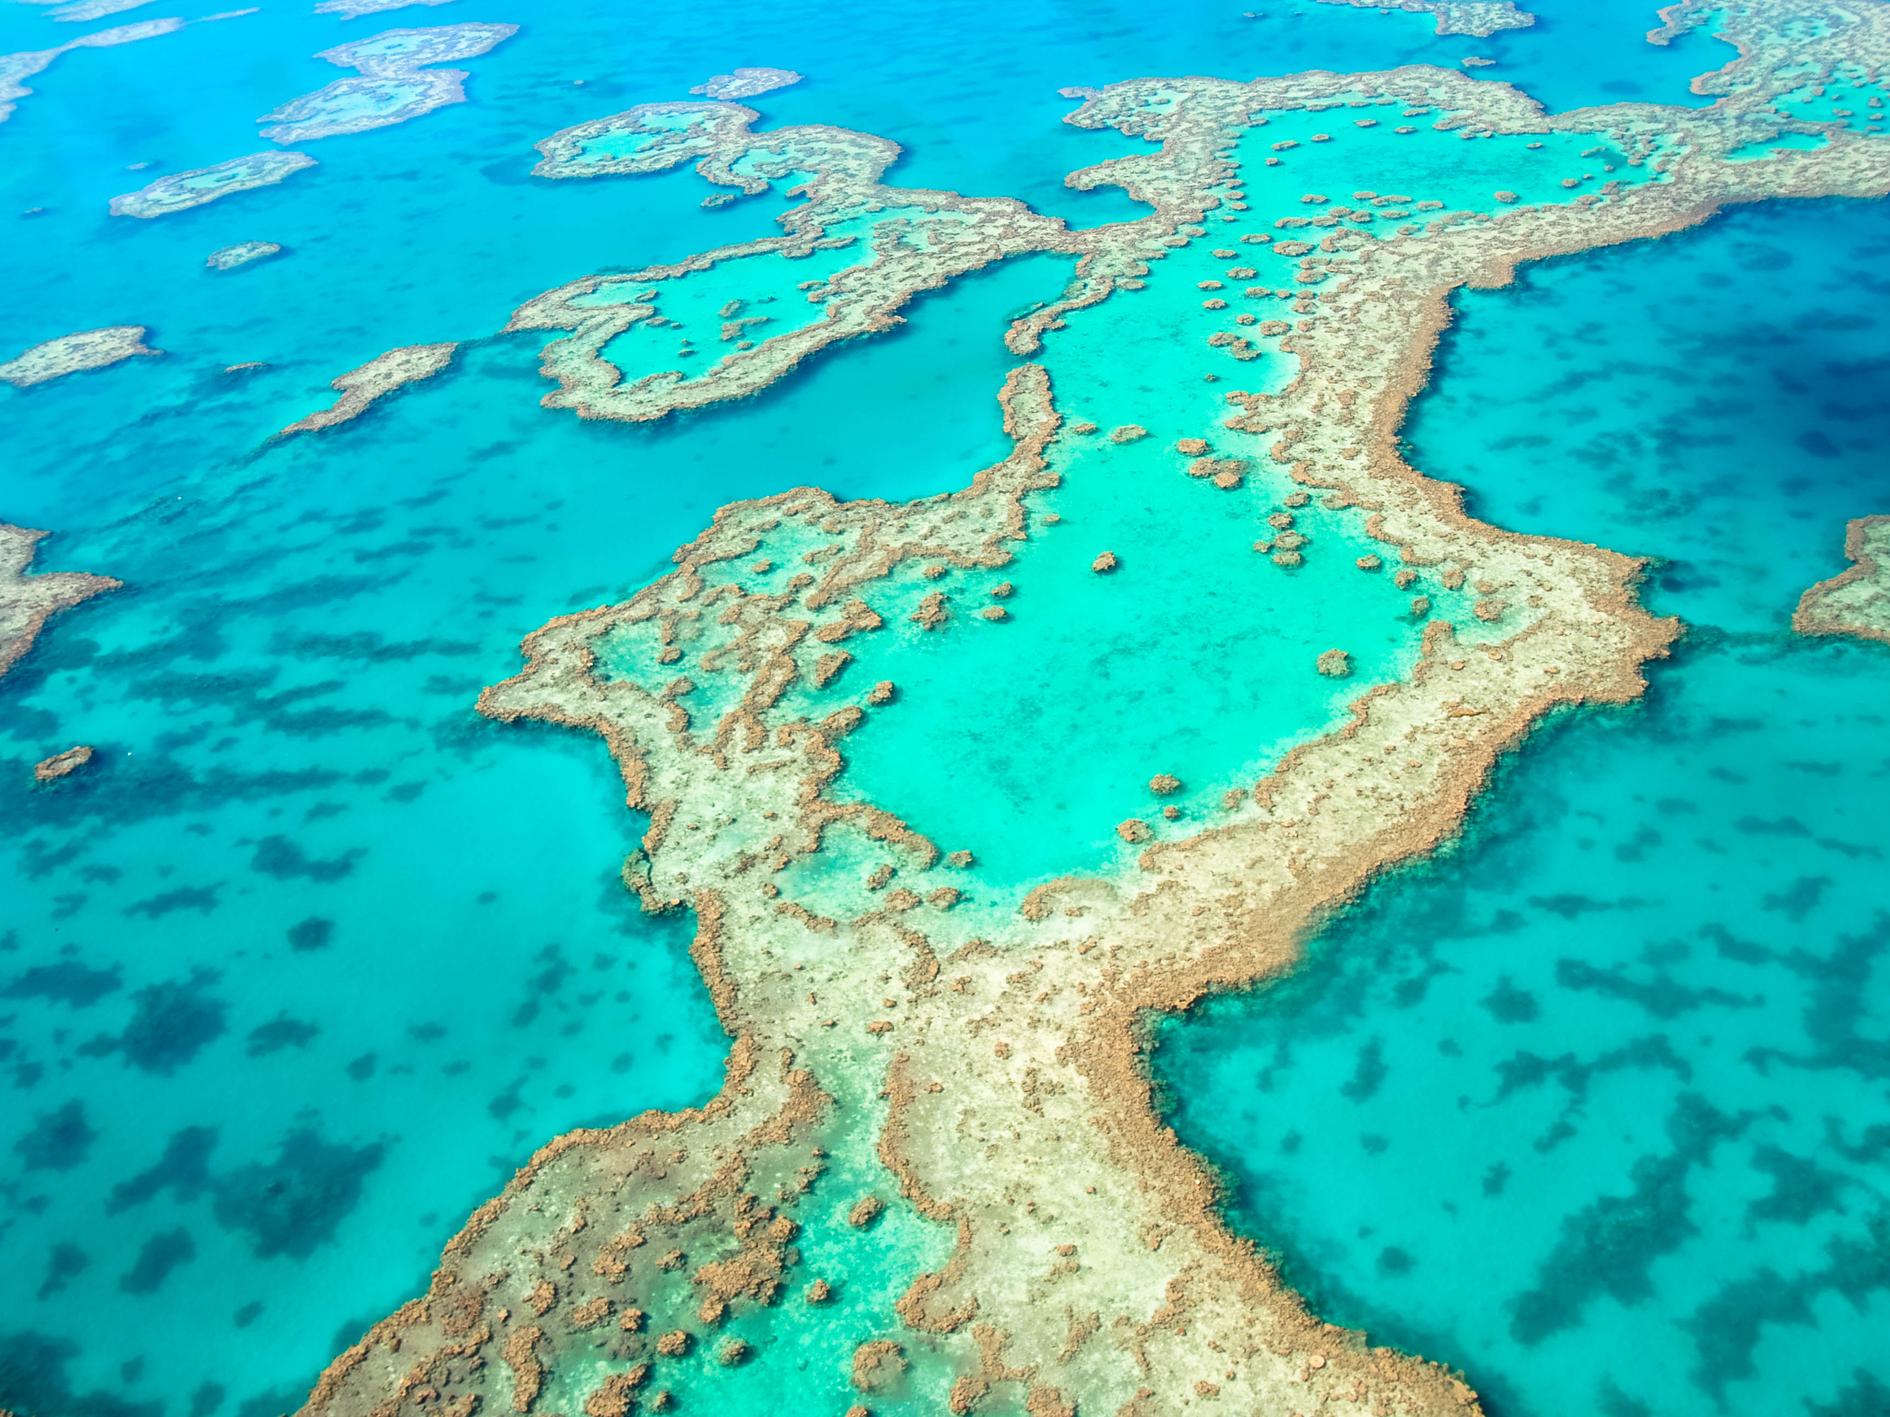 Areas of the Great Barrier Reef could be protected from rises in temperatures using a 'sun shield'